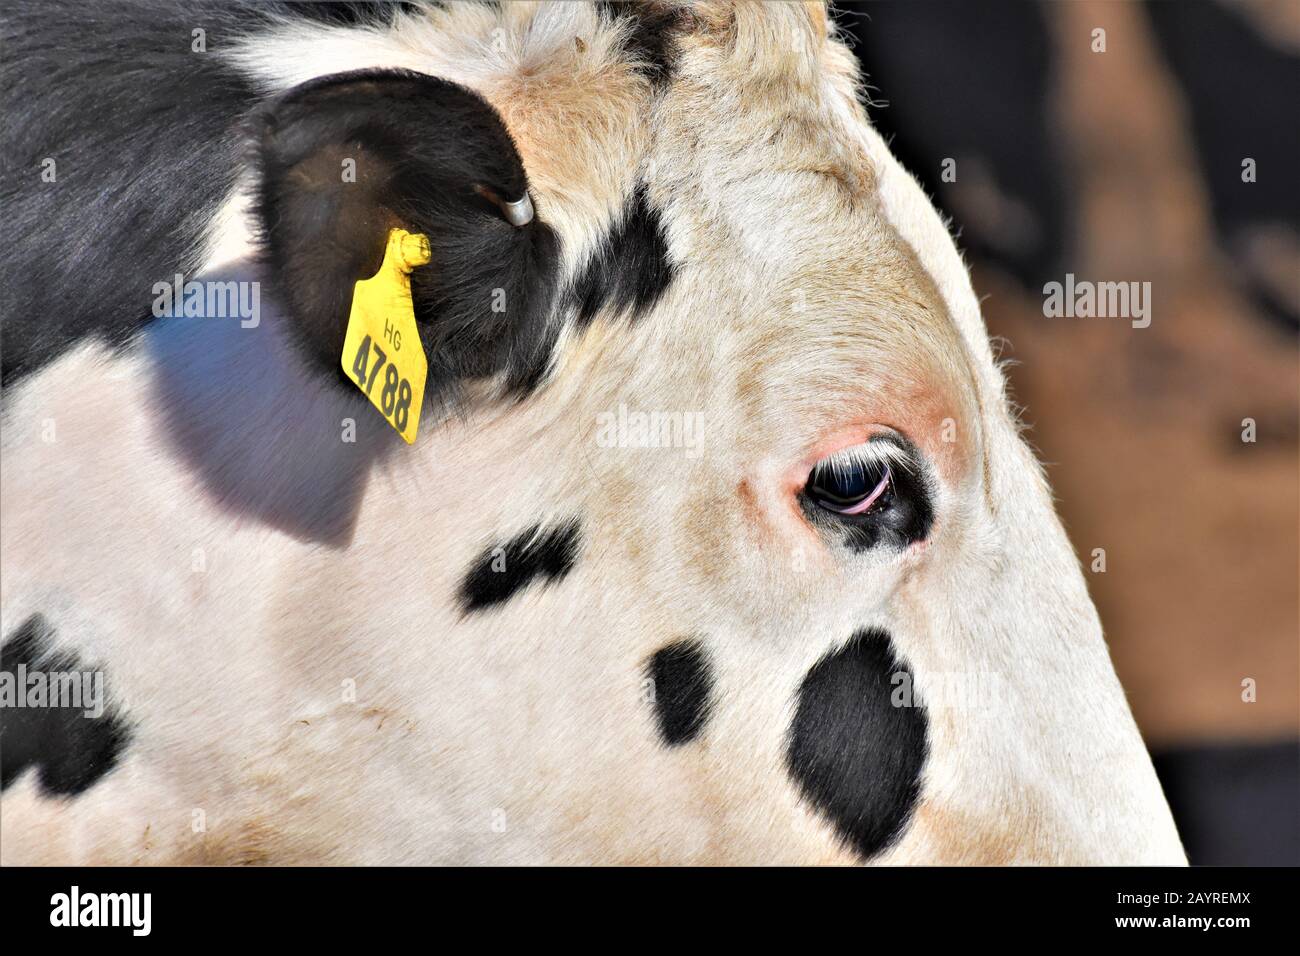 Cattle ranch in Central California Dairy and beef meat ranches with ear tags for identification in pens not free roaming grass feeding but with hay Stock Photo